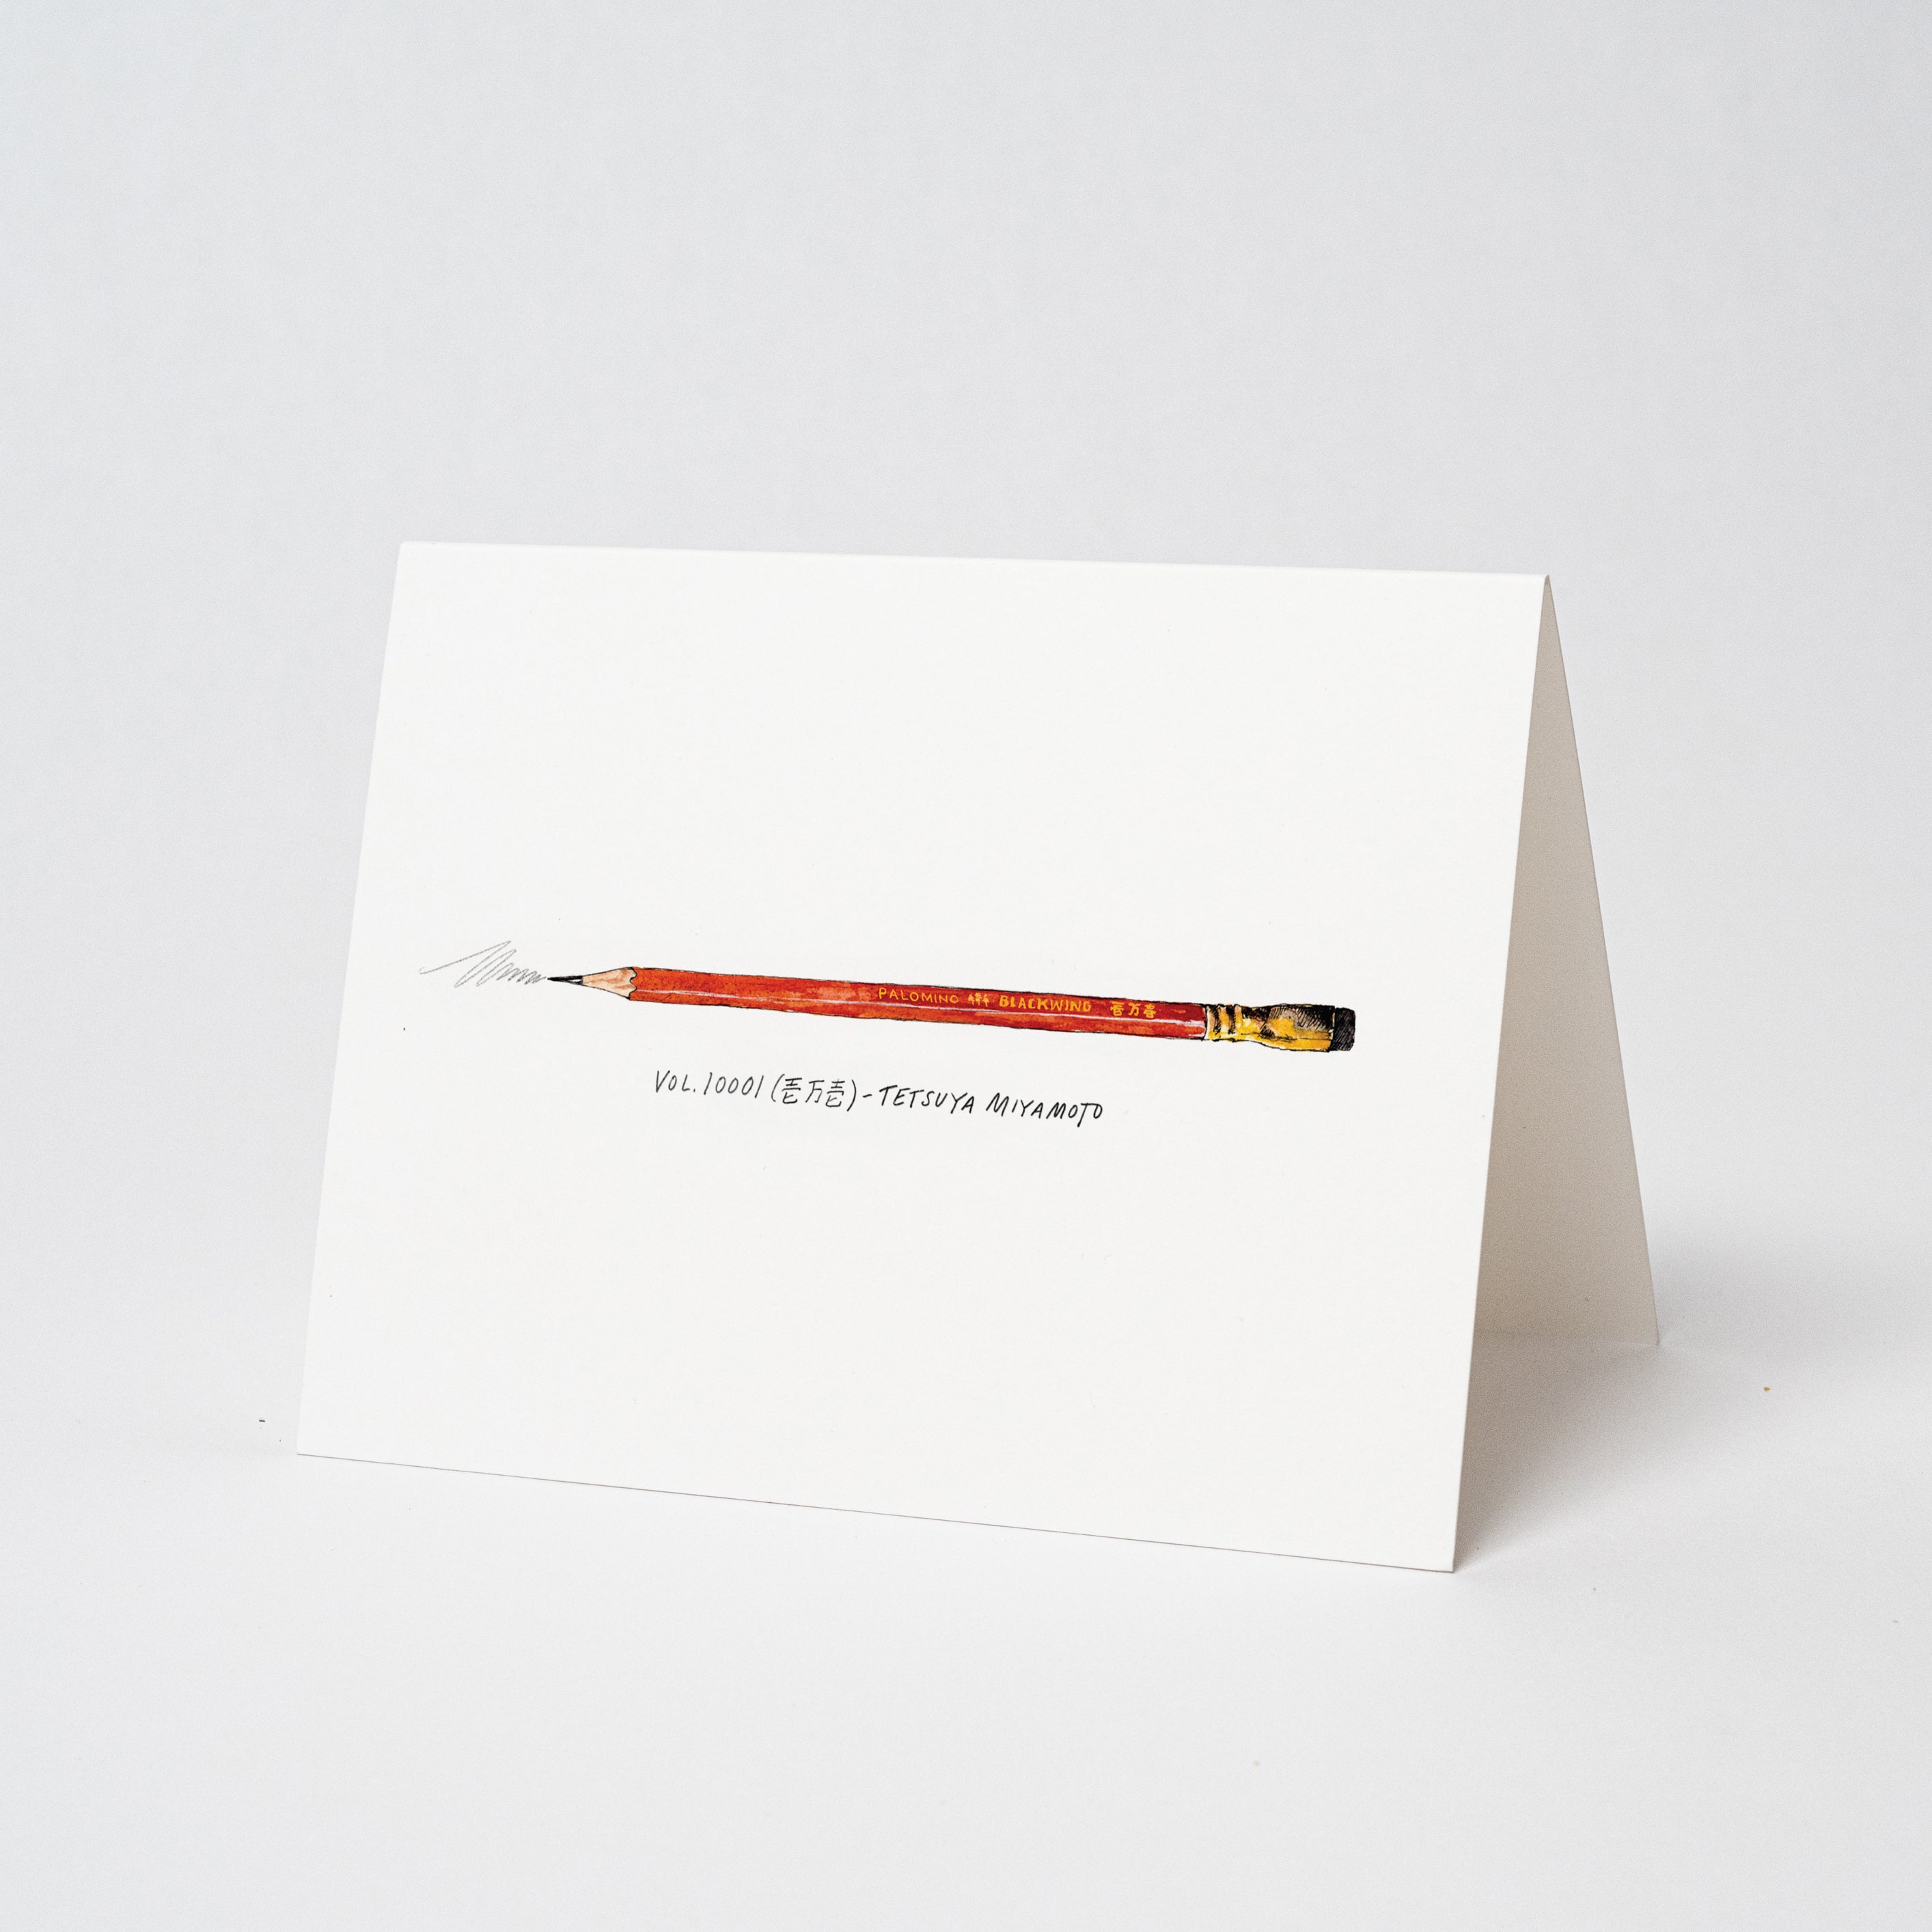 A limited edition Blackwing Volumes Notecard with a pencil on it by Blackwing Volumes.